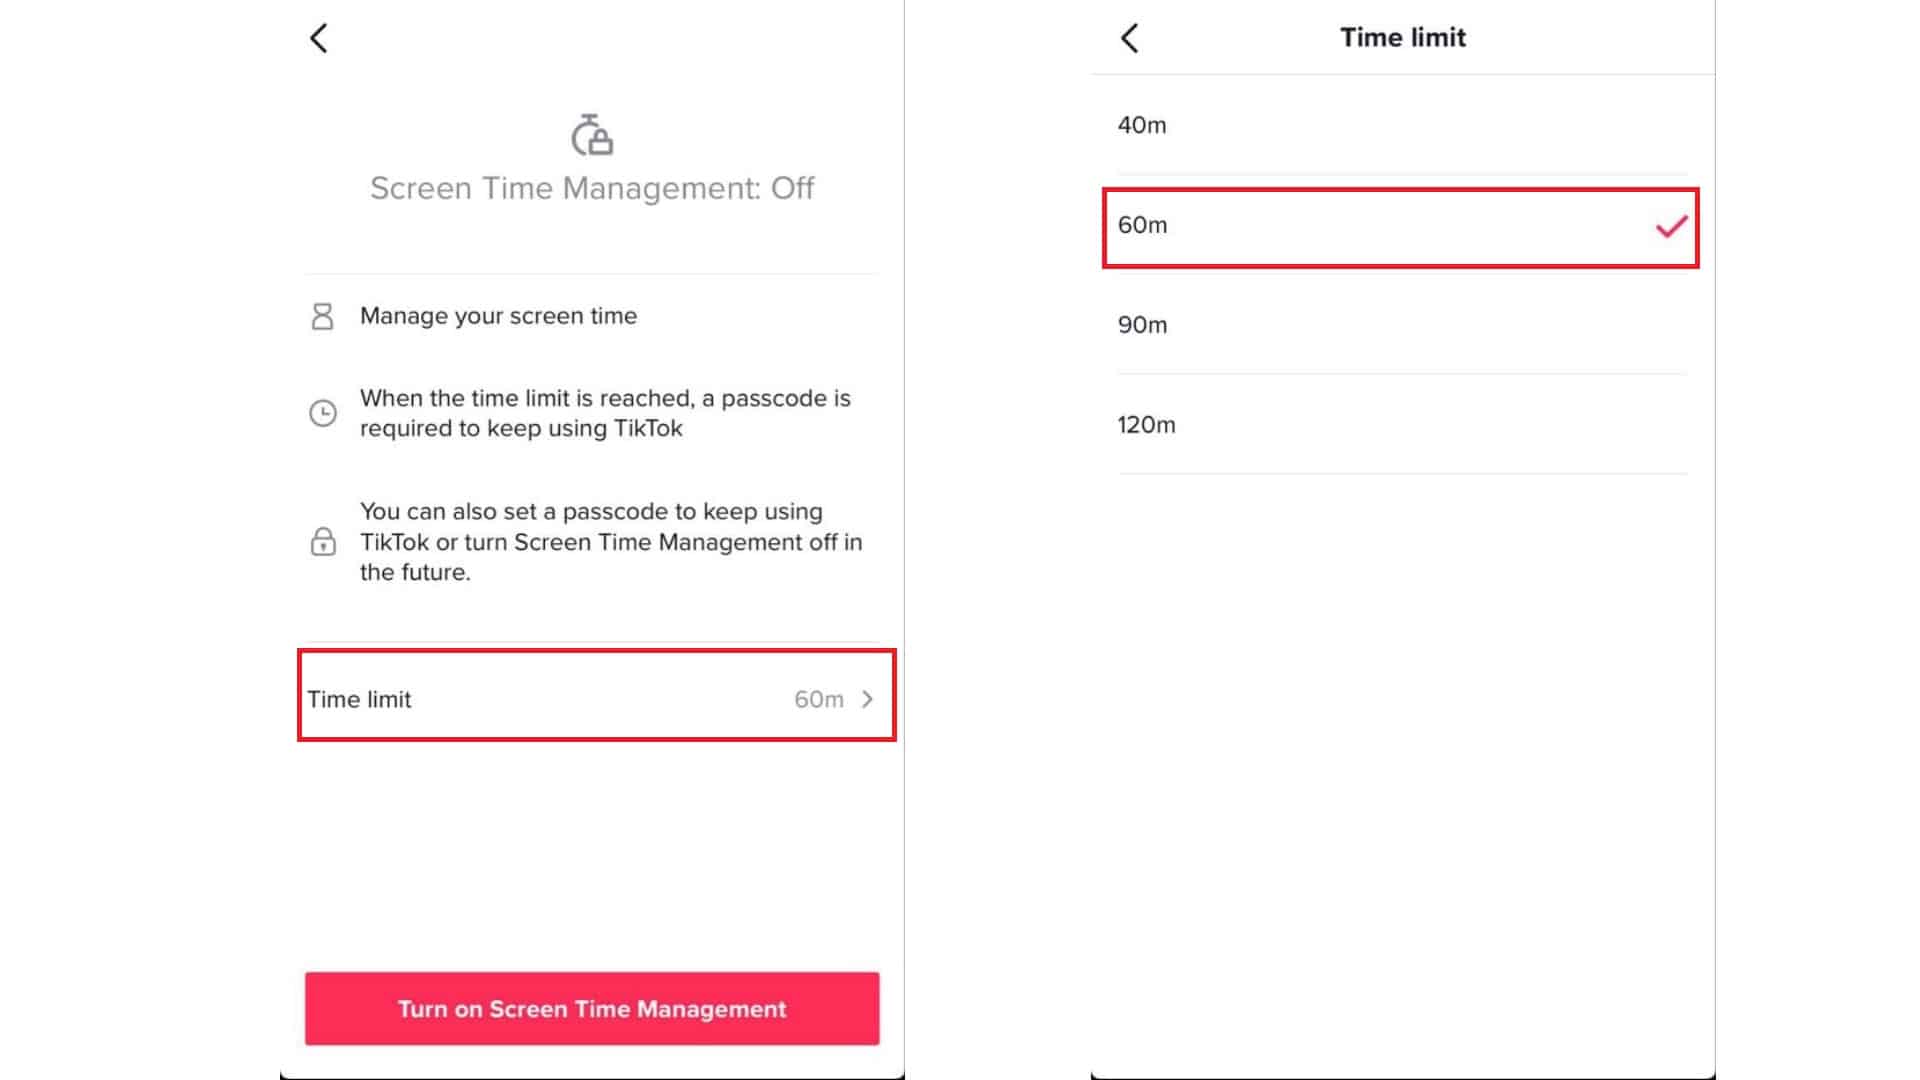 Enable-Screen-Time-Management-on-iPhone-TikTok-guide-2020